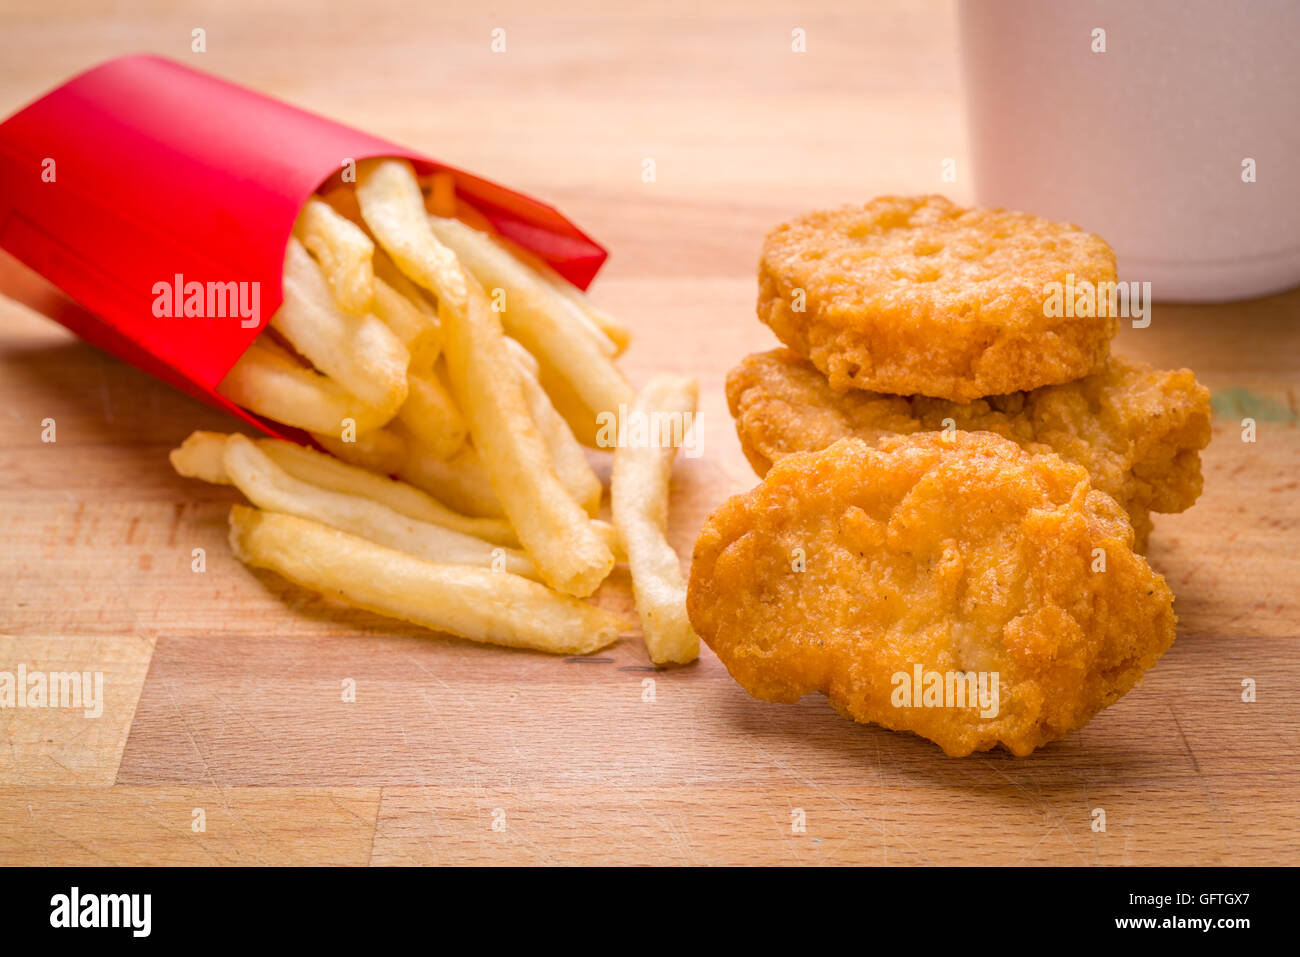 Kids, Child meal Golden brown Chicken nuggets and French fries on a wood background Stock Photo